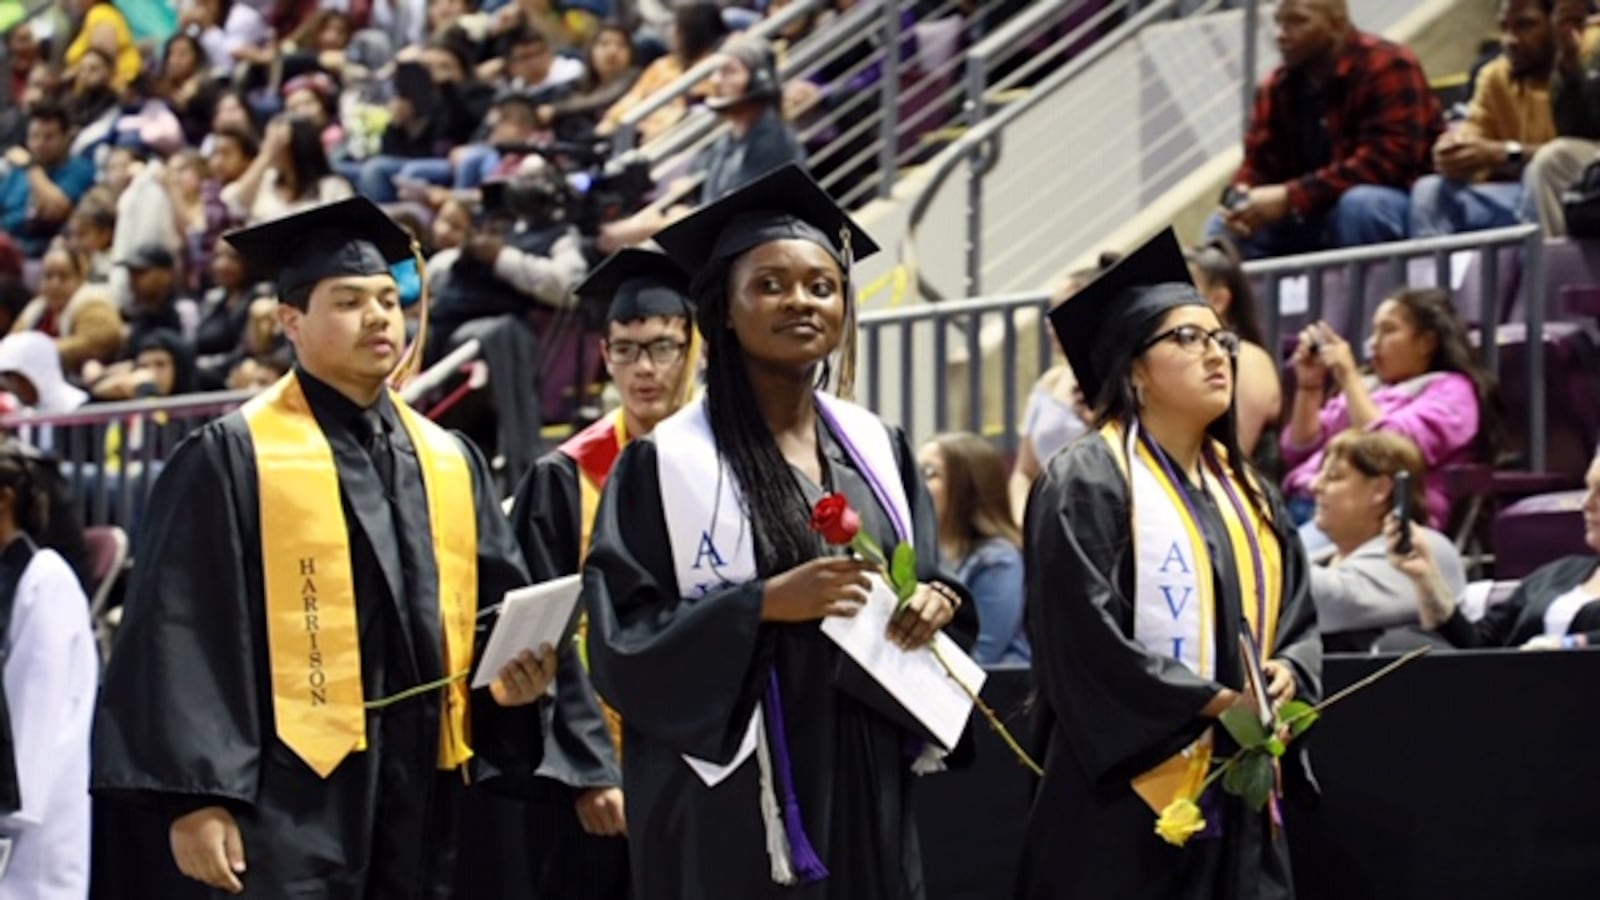 Avid students at Harrison High School's 2019 graduation ceremony stand proudly after receiving their diplomas.